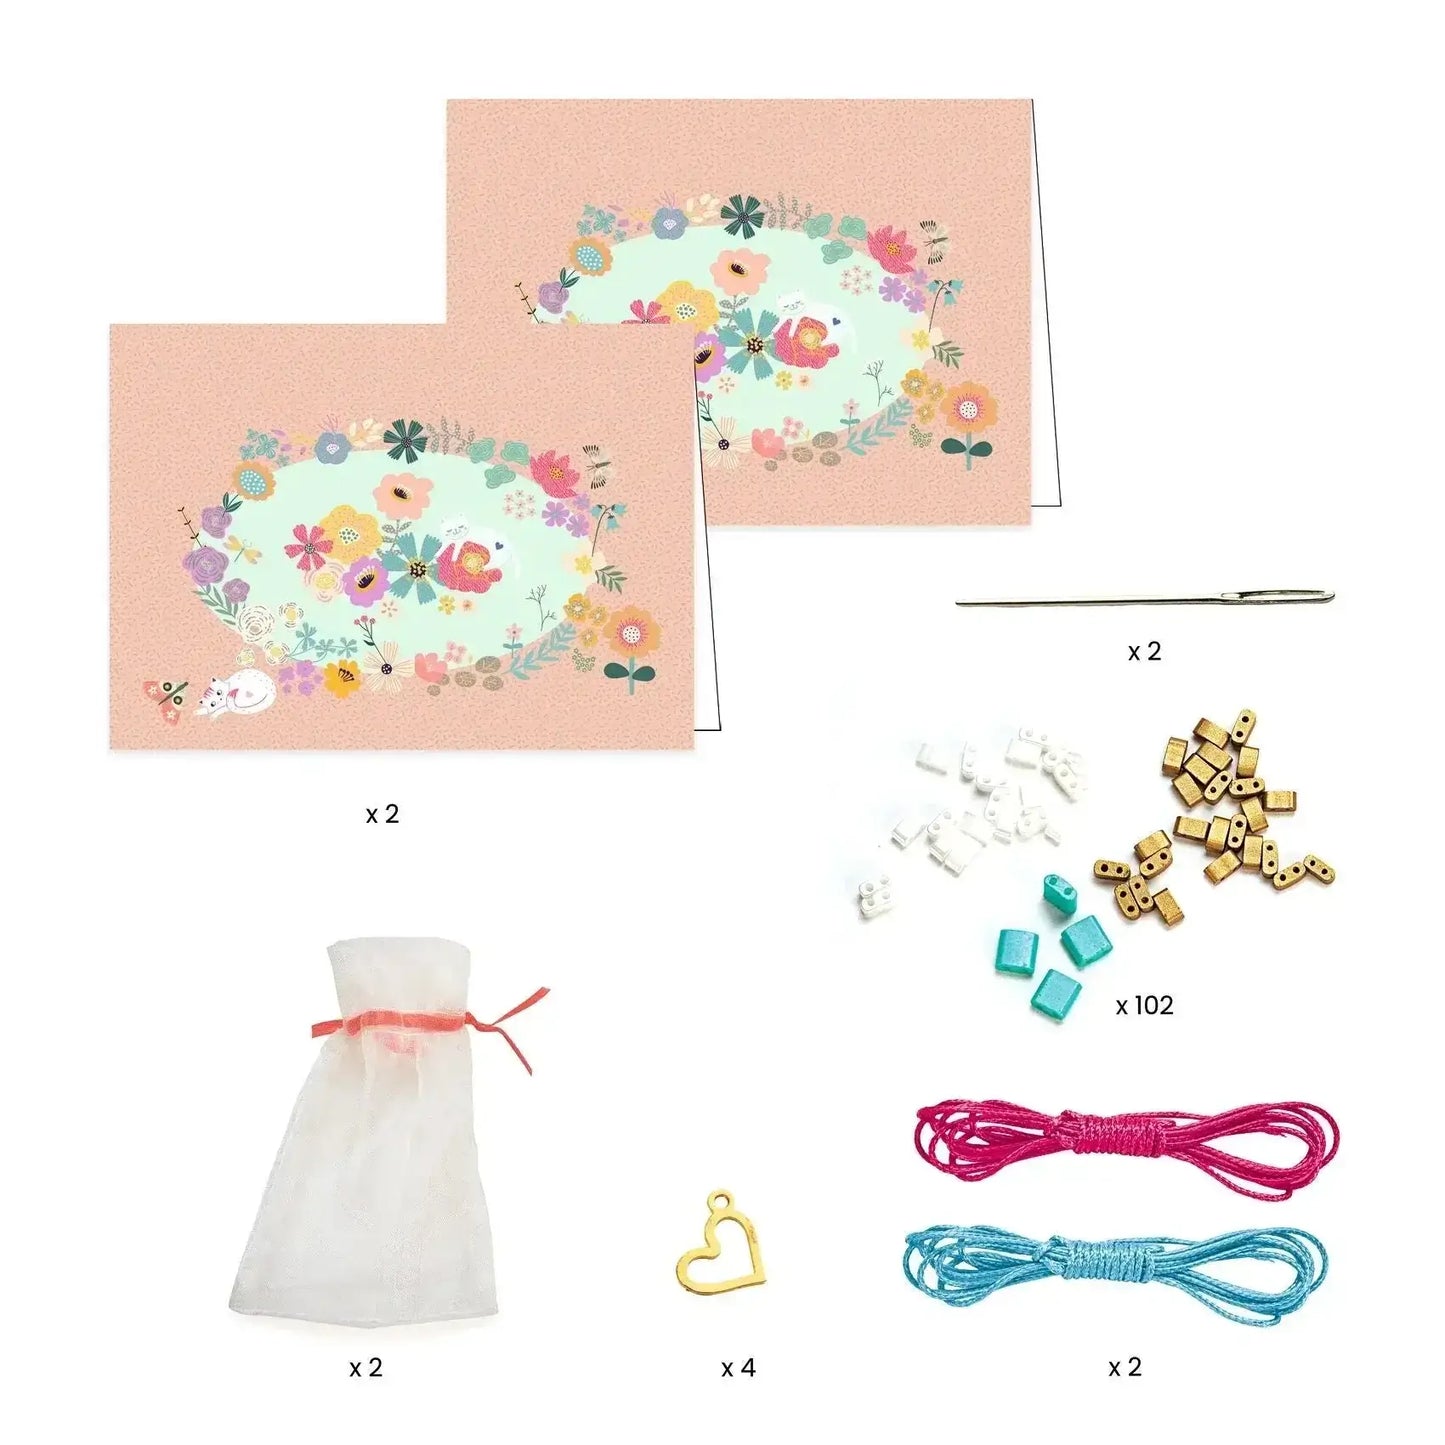 Beads and Jewelry Tila and Flowers Art Kit